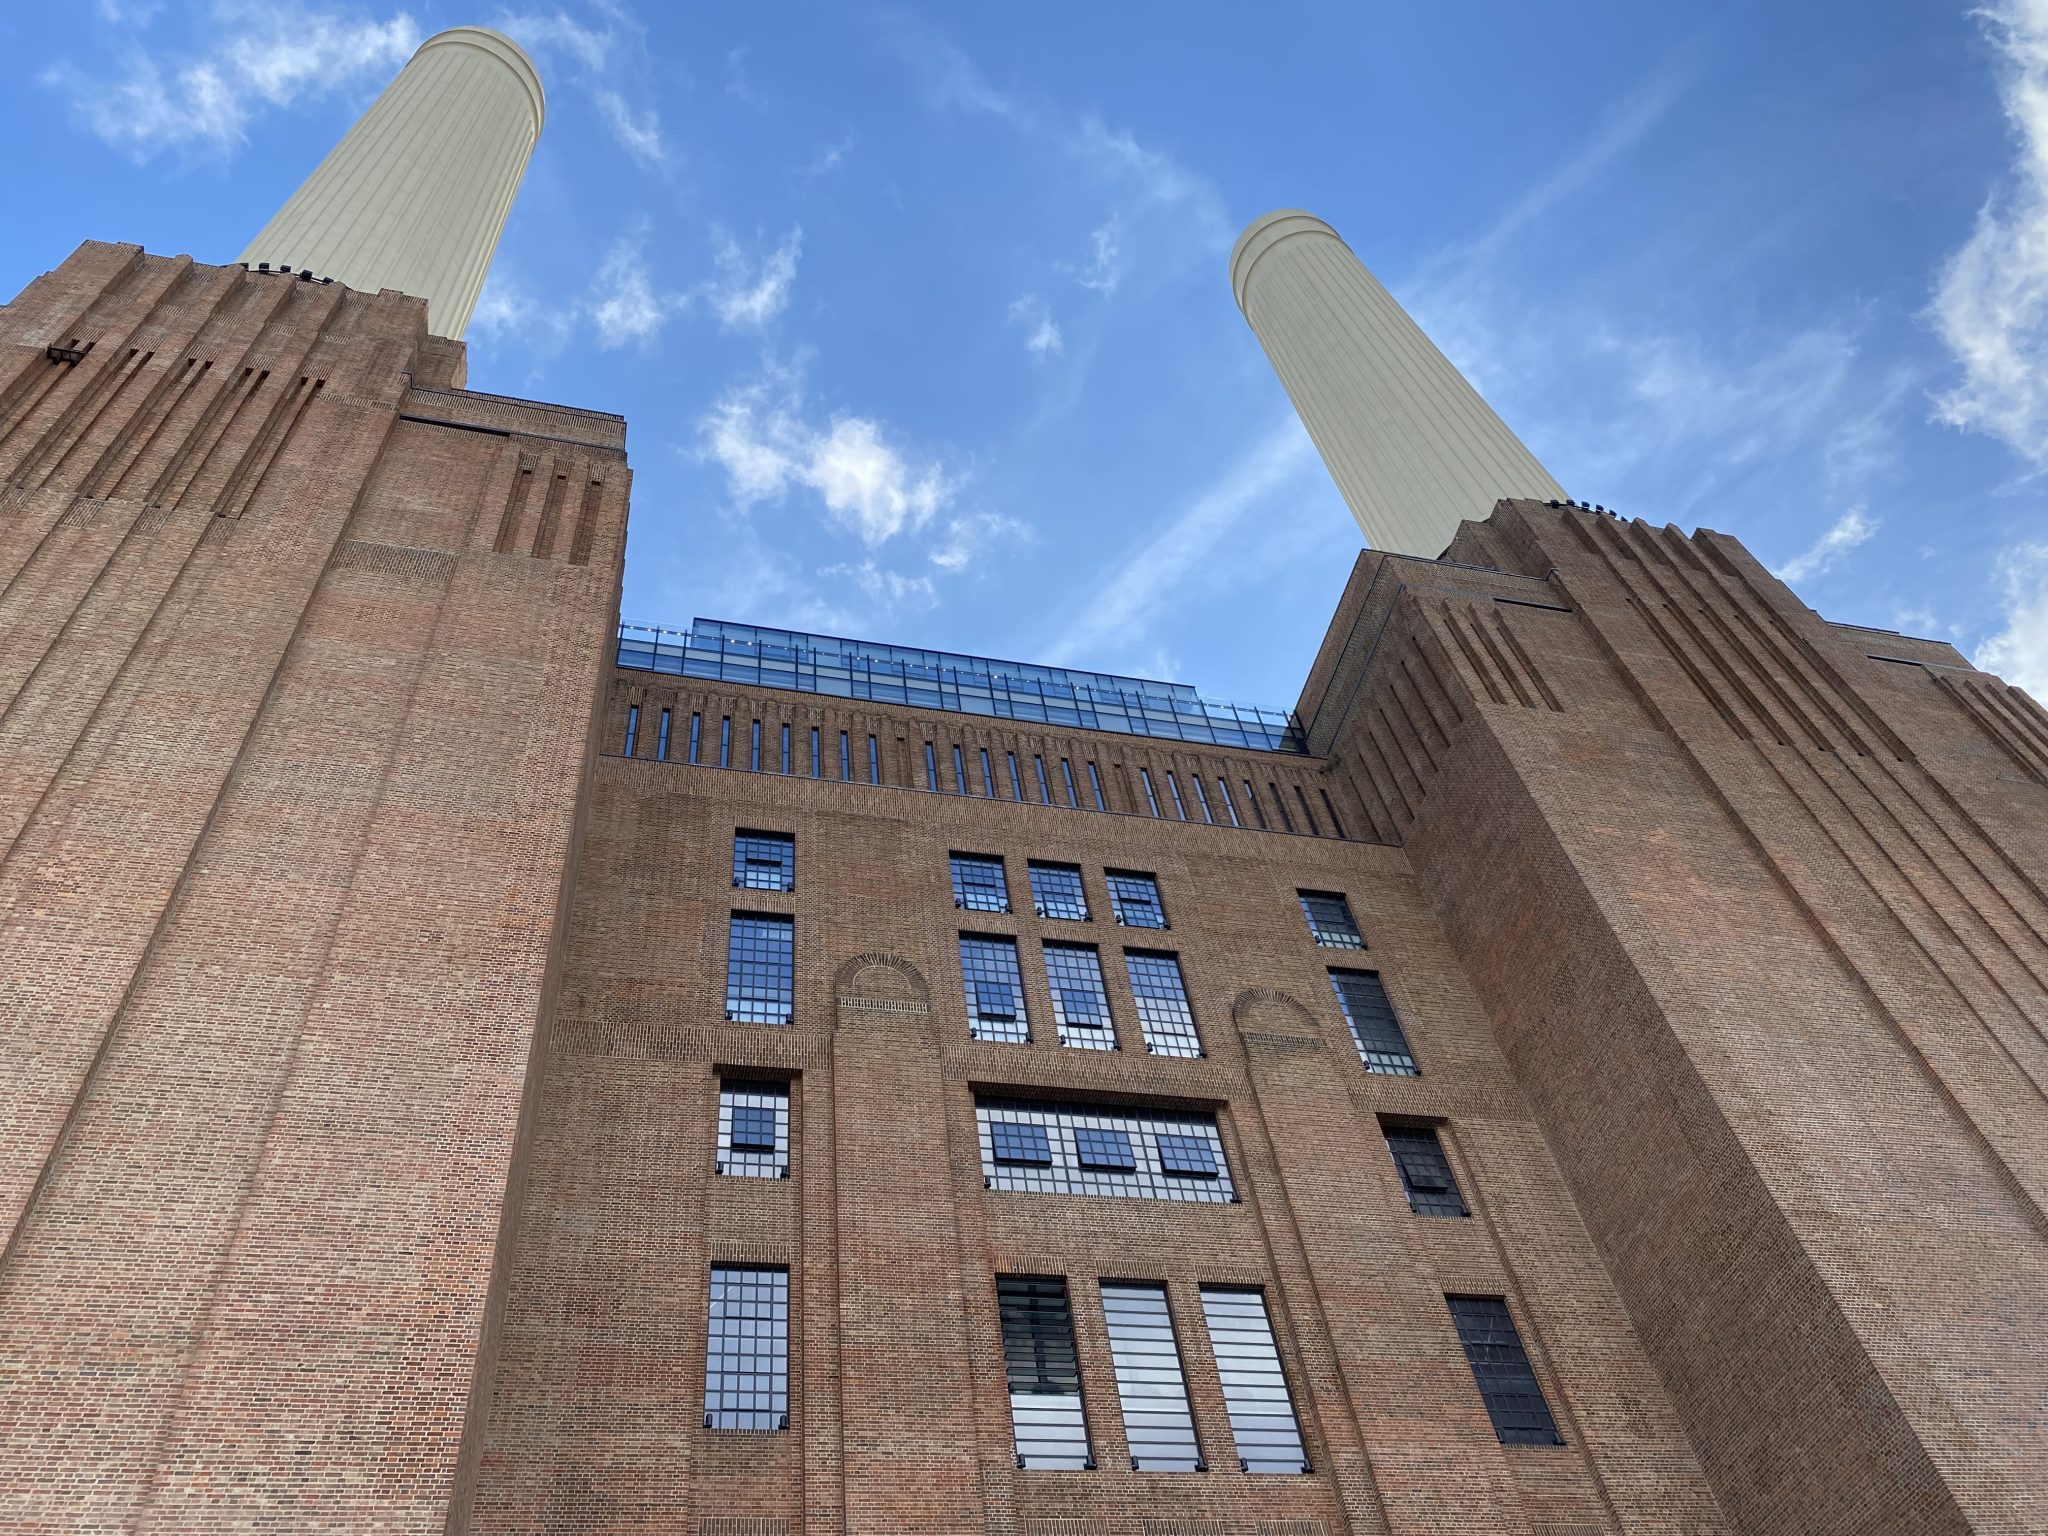 Lots of greener retailing examples at Battersea Power Station